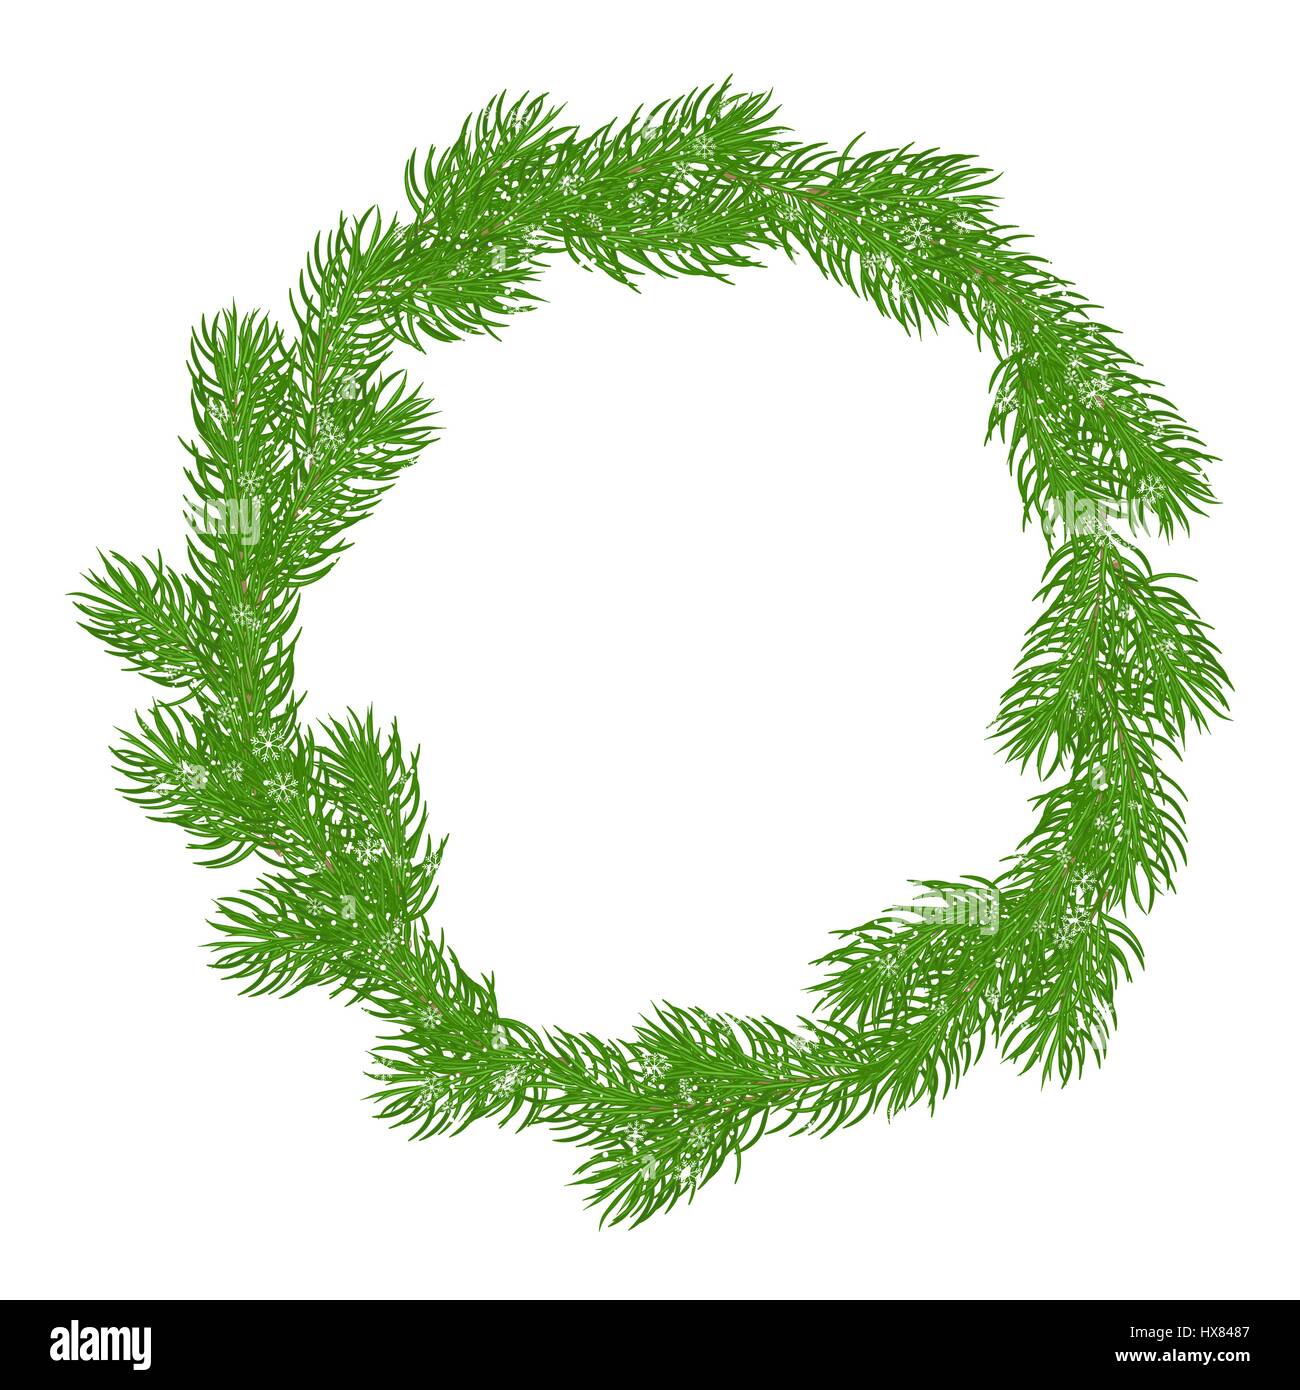 Natural Christmas wreath or a round frame of bright green spruce branches covered with snow and delicate snowflakes. Isolated on white background. Han Stock Vector